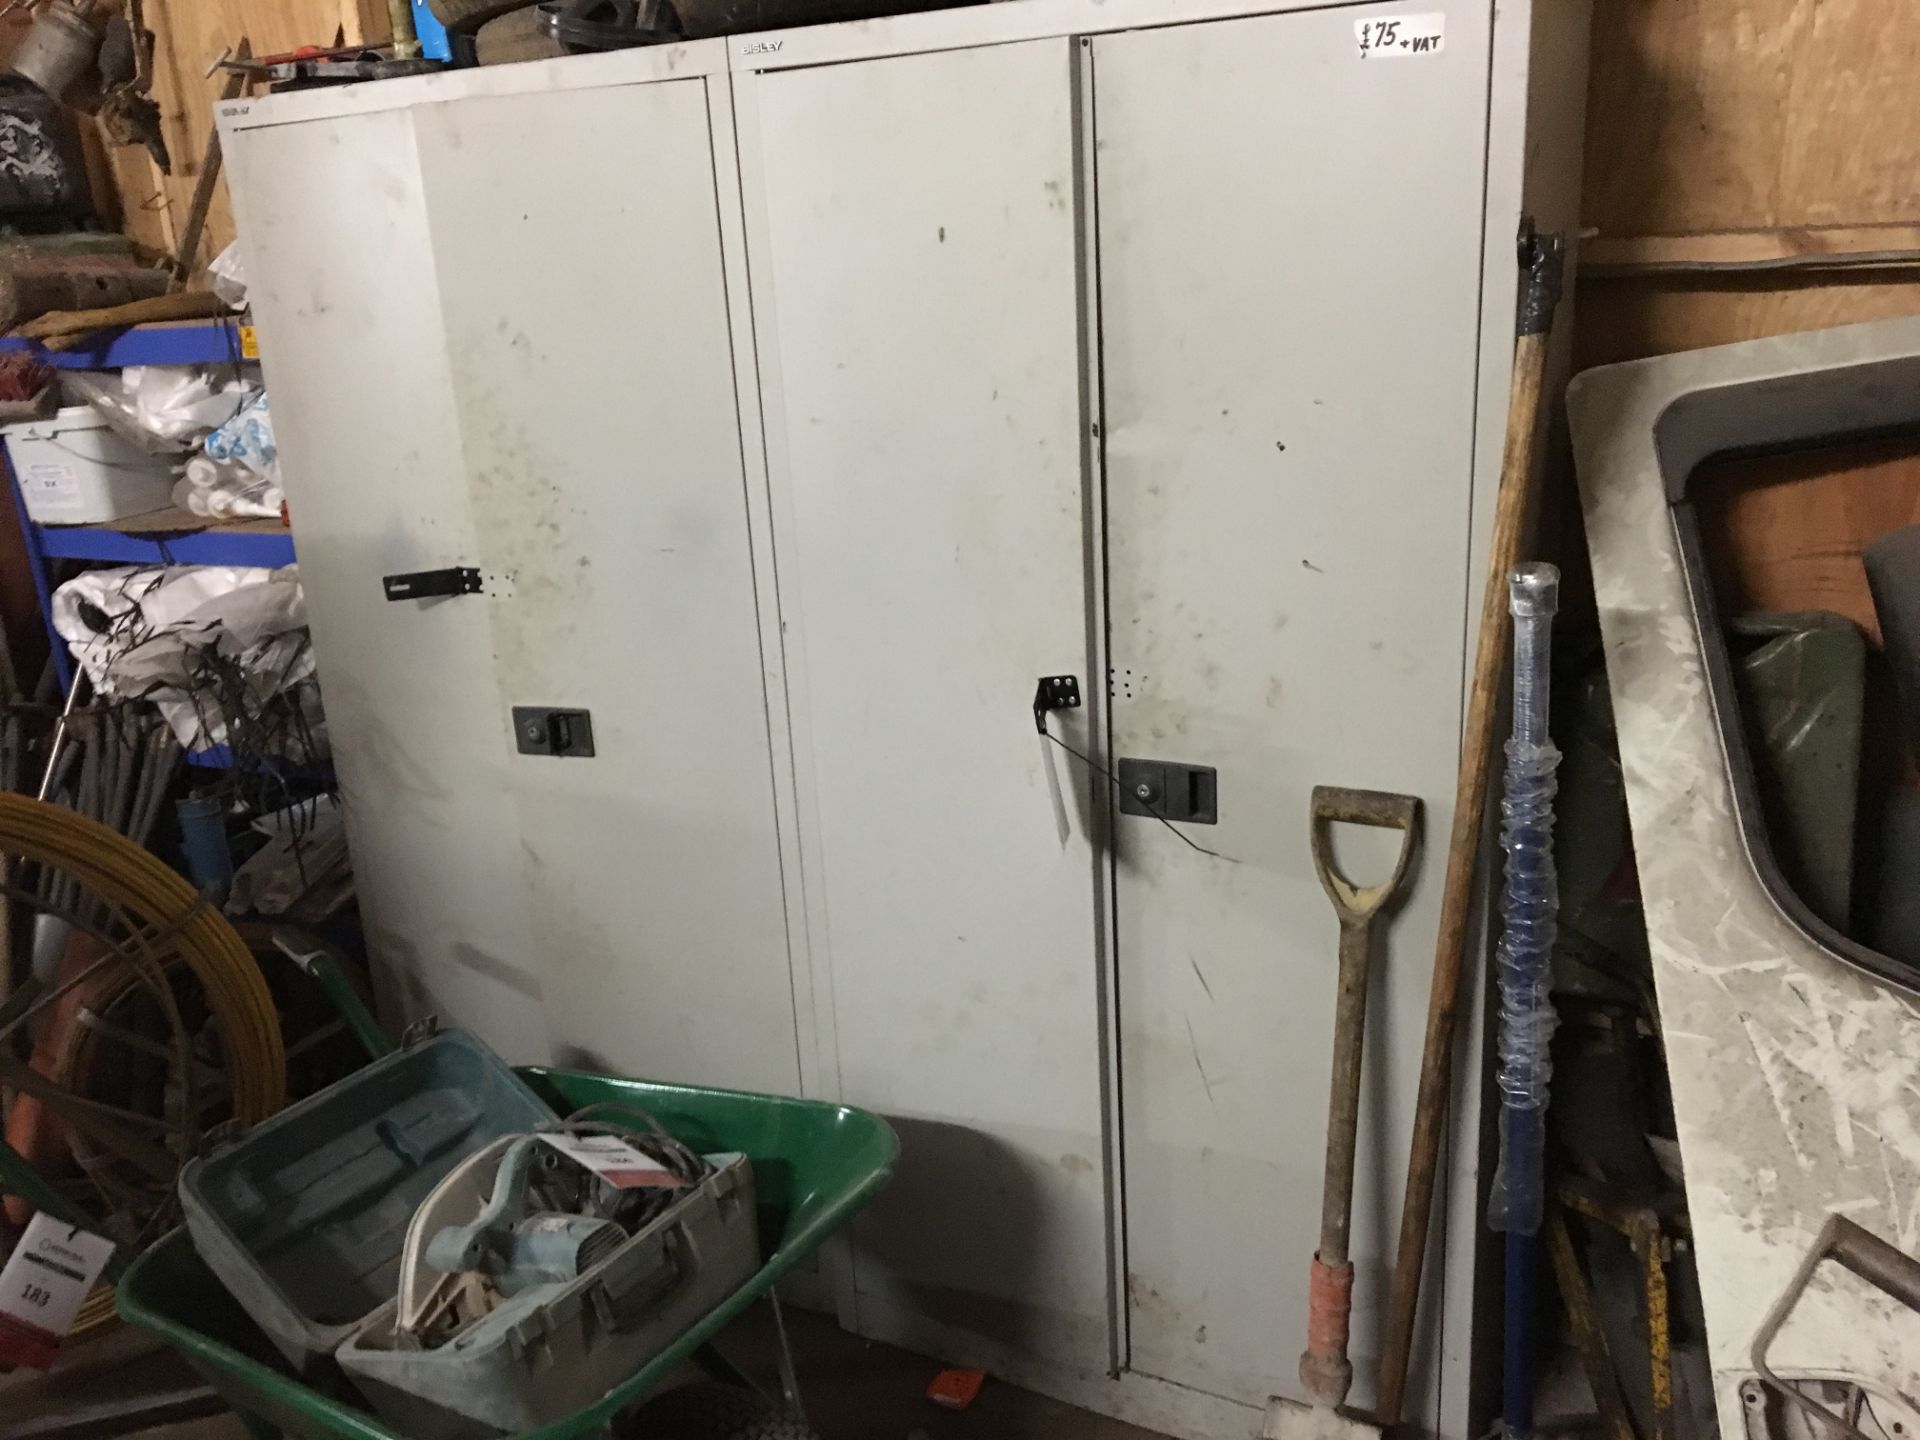 2 x metal cabinets & contents - vehicle spares, rods, racking & contents & wheel barrow wheels.